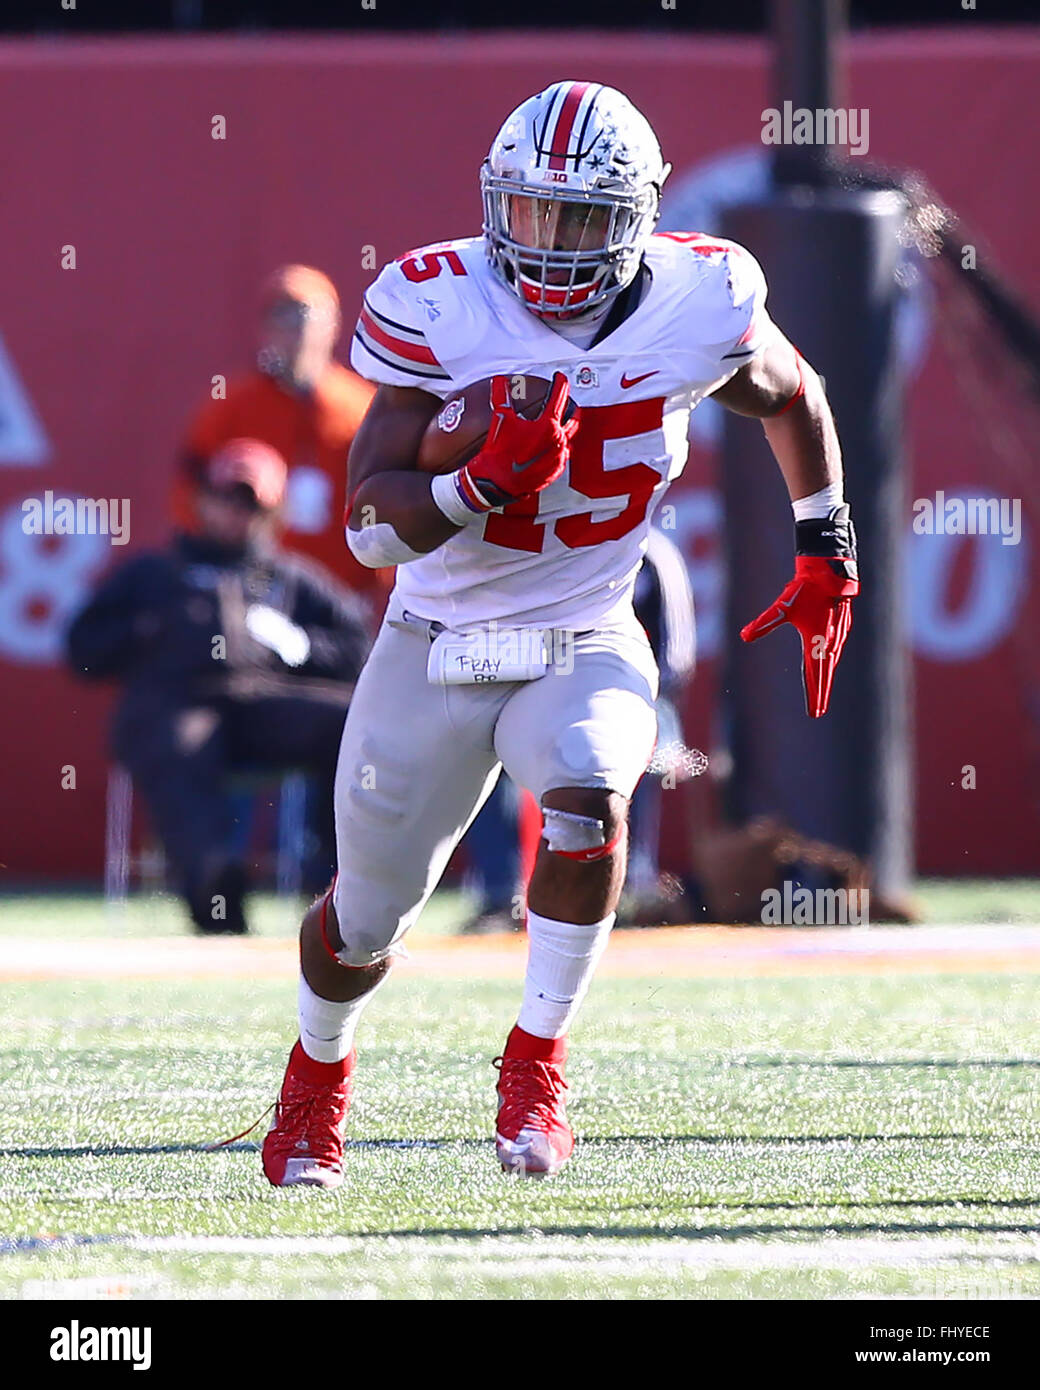 Ohio State Buckeyes running back Ezekiel Elliott (15) runs the ball during an NCAA football game against the Illinois Fighting Illini at Memorial Stadium in Champaign, IL. Ohio State won the game 28-3 to improve to 10-0 on the season. Mandatory credit: Billy Hurst/CSM Stock Photo